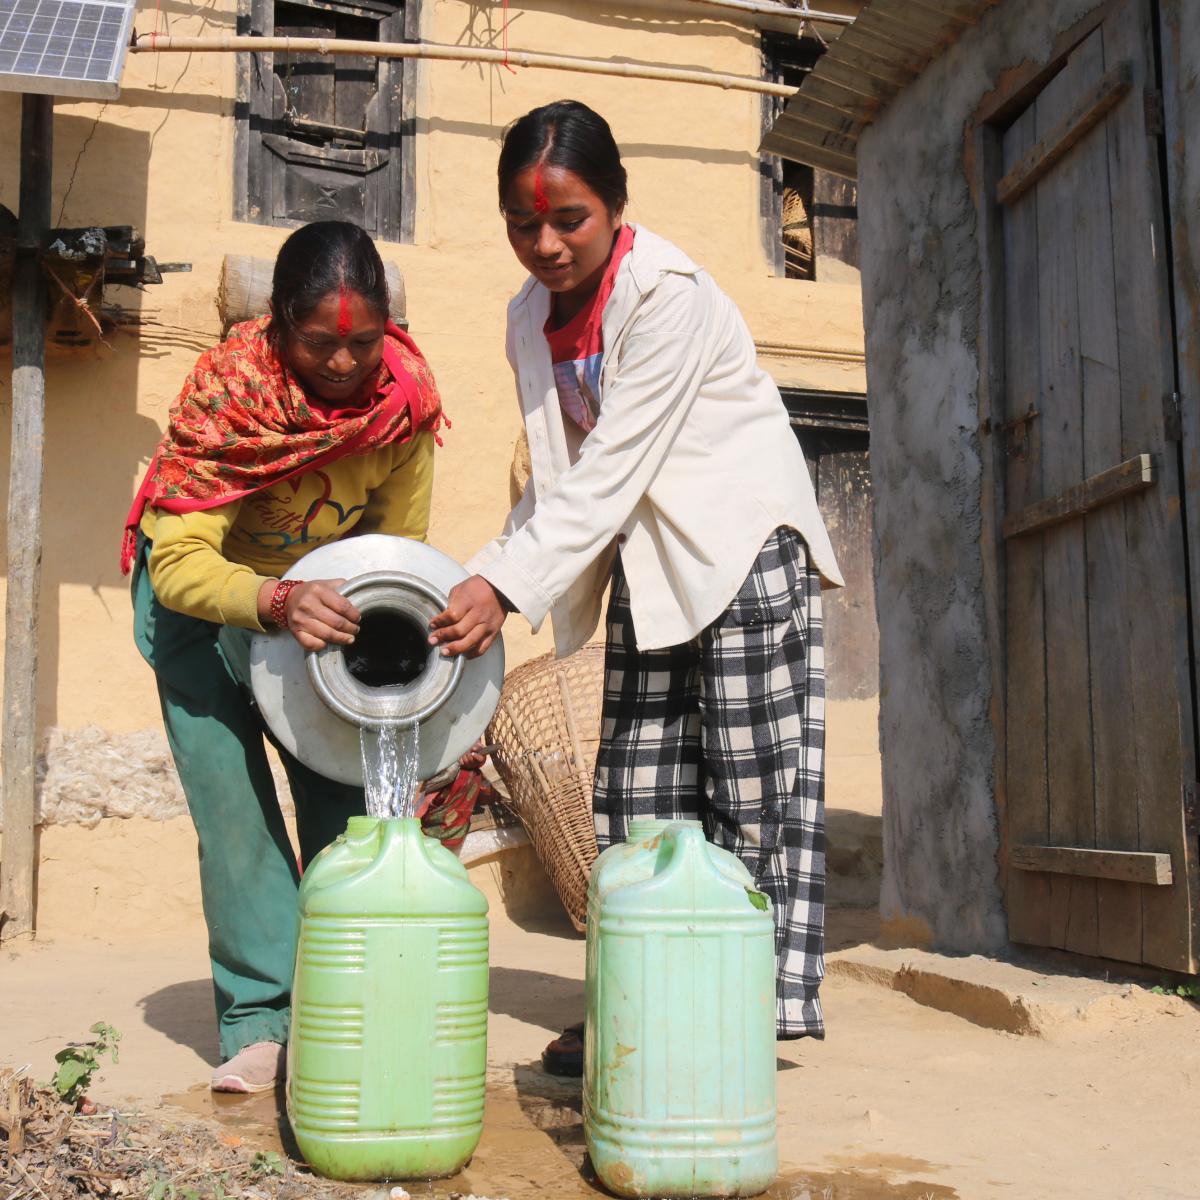 Sangita and her sister-in-law are working to fill the water pots at their home in Pokharikanda. Many households in her village used to spend hours each day fetching water. Now they have a solar-lifting water supply and sanitation system thanks to the USAID Karnali Water Activity and its partnership with the local government. 